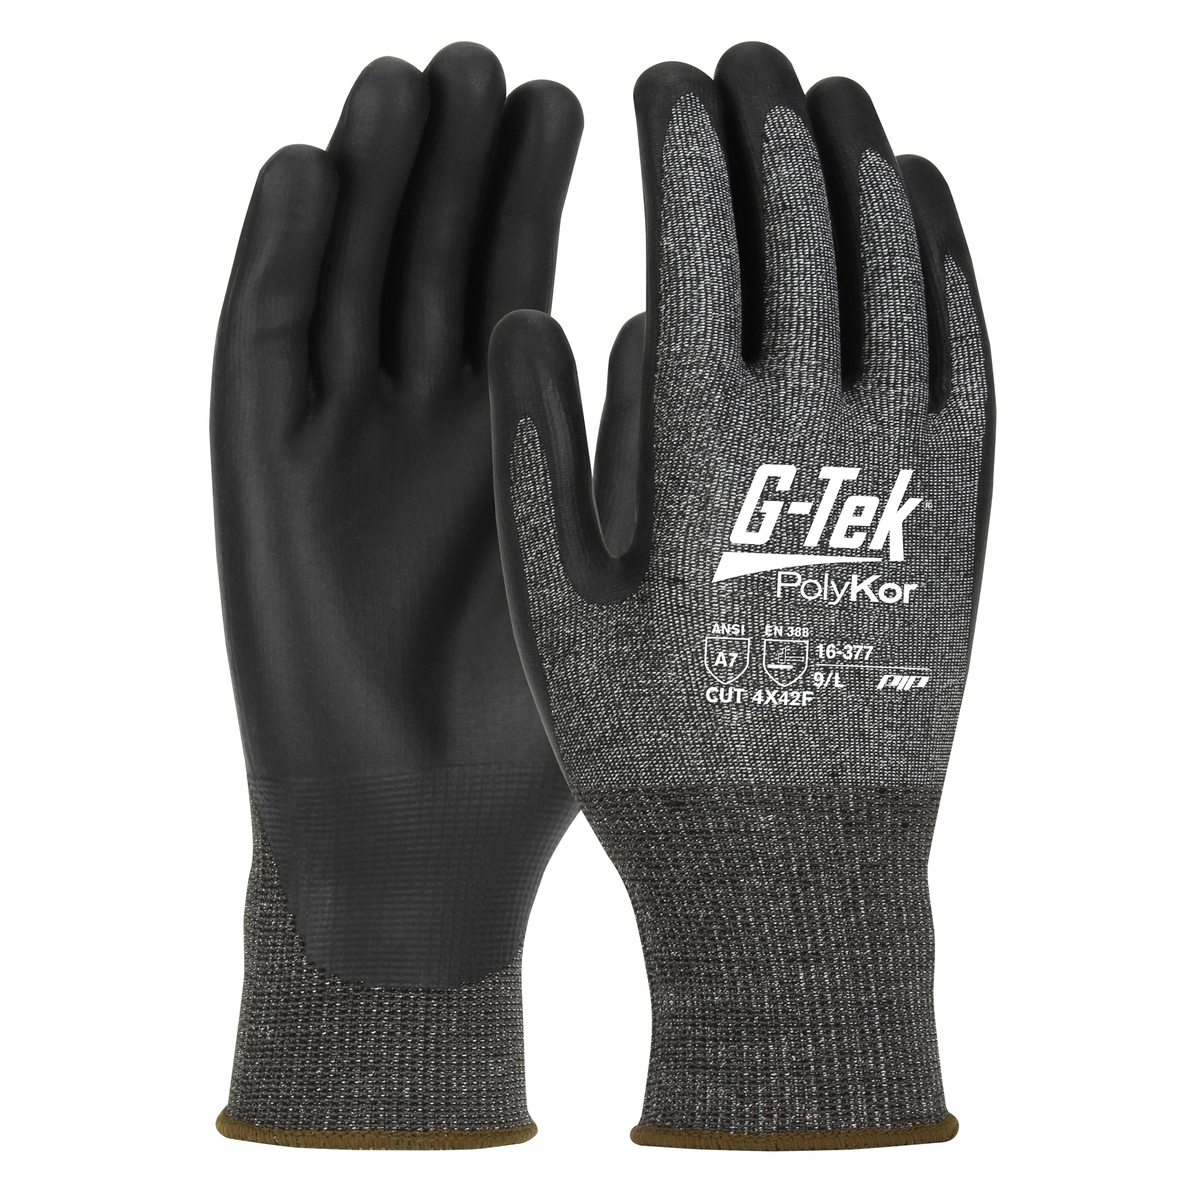 PIP® Large G-Tek® PolyKor® X7™ 18 Gauge PolyKor® Cut Resistant Gloves With NeoFoam® Coating